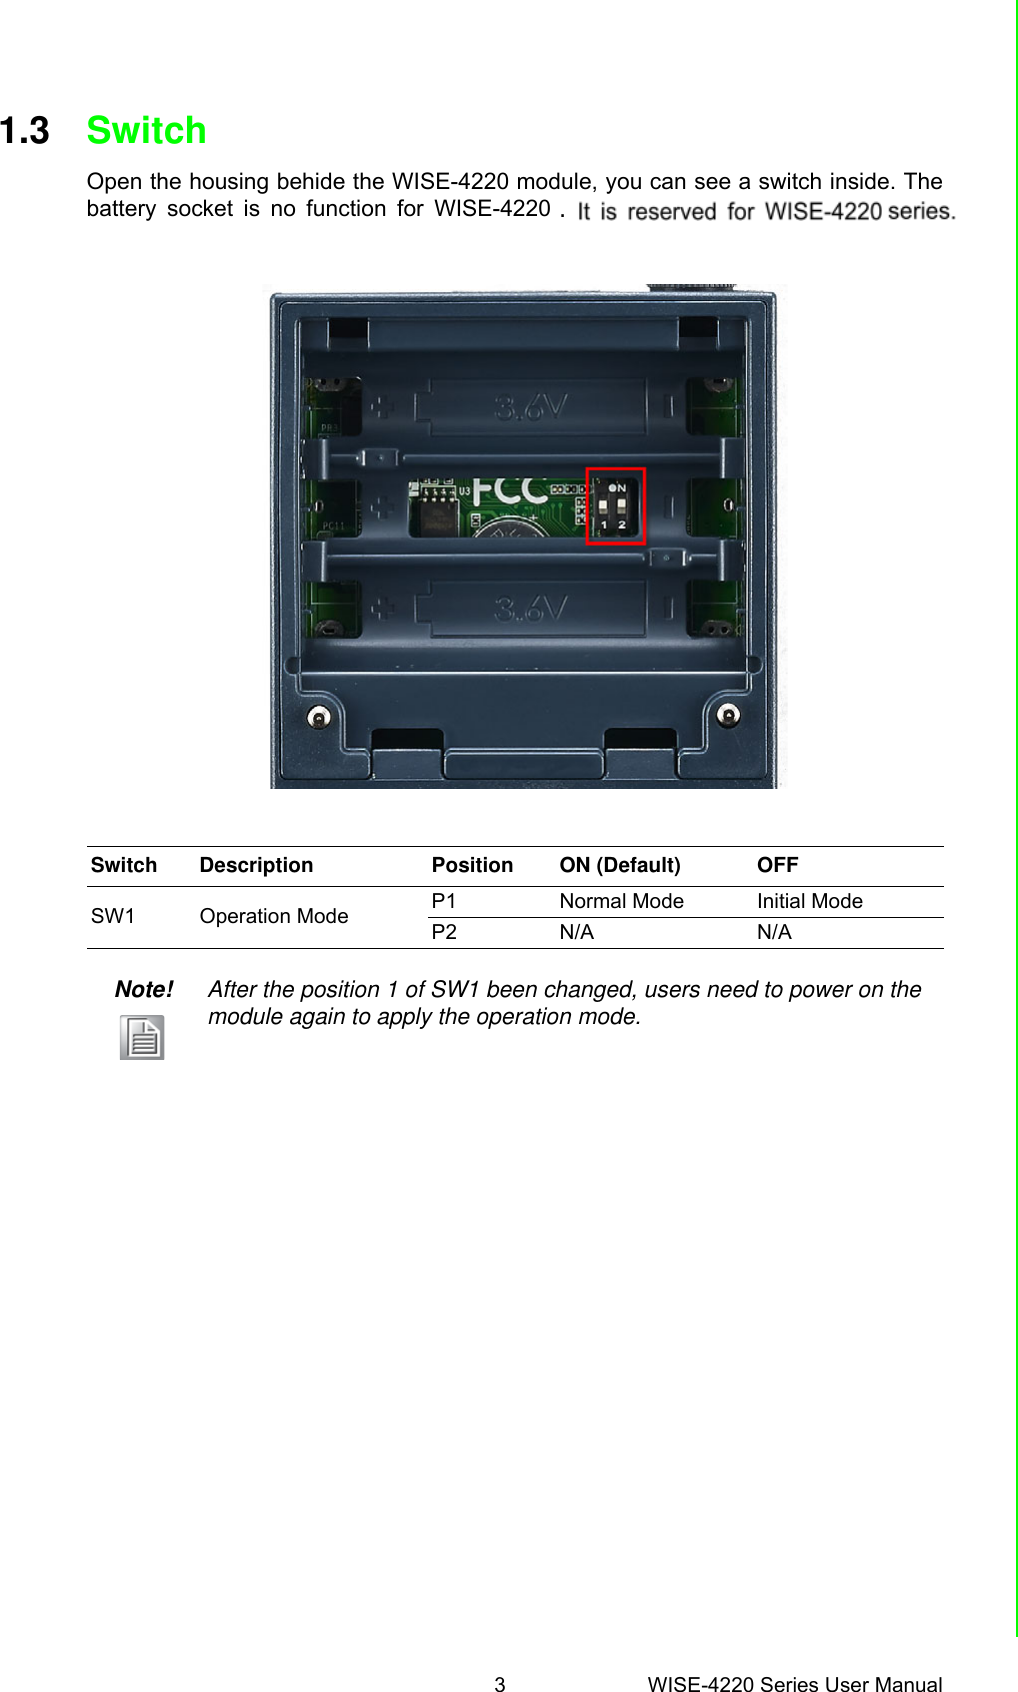 3 WISE-4220 Series User ManualChapter 1 Product Overview1.3 SwitchOpen the housing behide the WISE-4220 module, you can see a switch inside. Thebattery socket is no function for WISE-4220 series. It is reserved for WISE-4220series.Switch Description Position ON (Default) OFFSW1 Operation Mode P1 Normal Mode Initial ModeP2 N/A N/ANote! After the position 1 of SW1 been changed, users need to power on the module again to apply the operation mode..